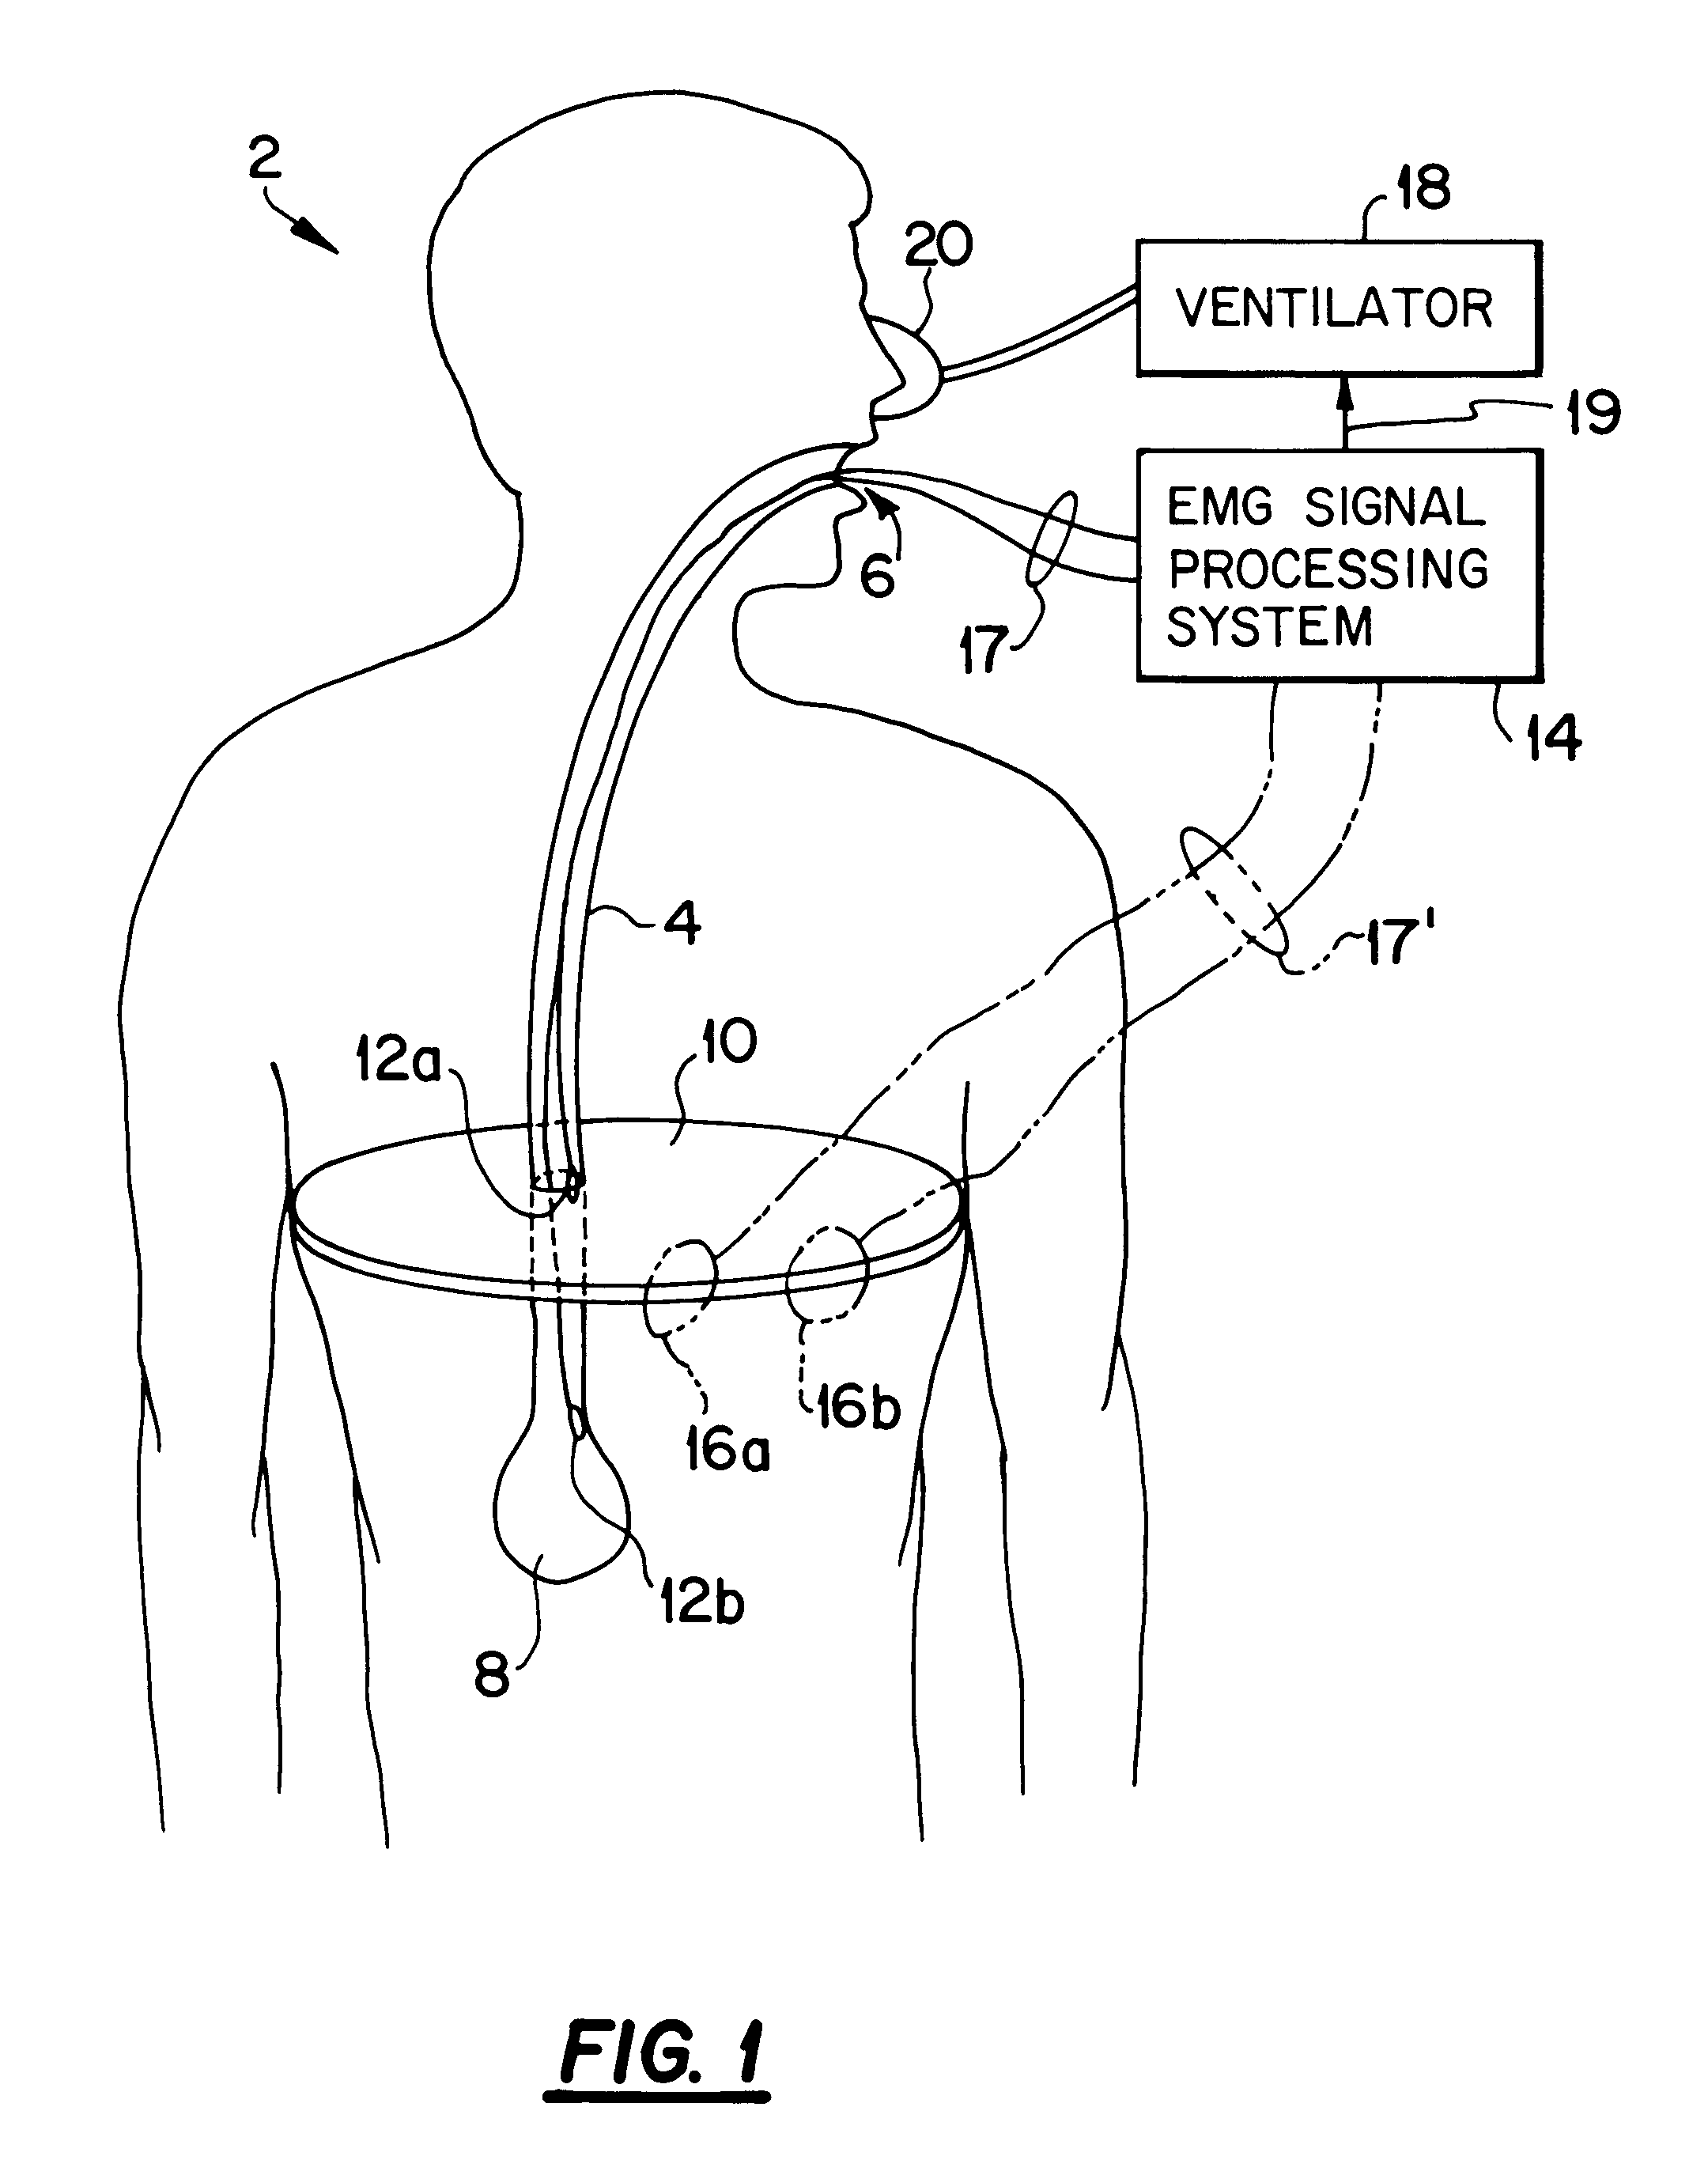 Method and apparatus for producing a model EMG signal from a measured EMG signal